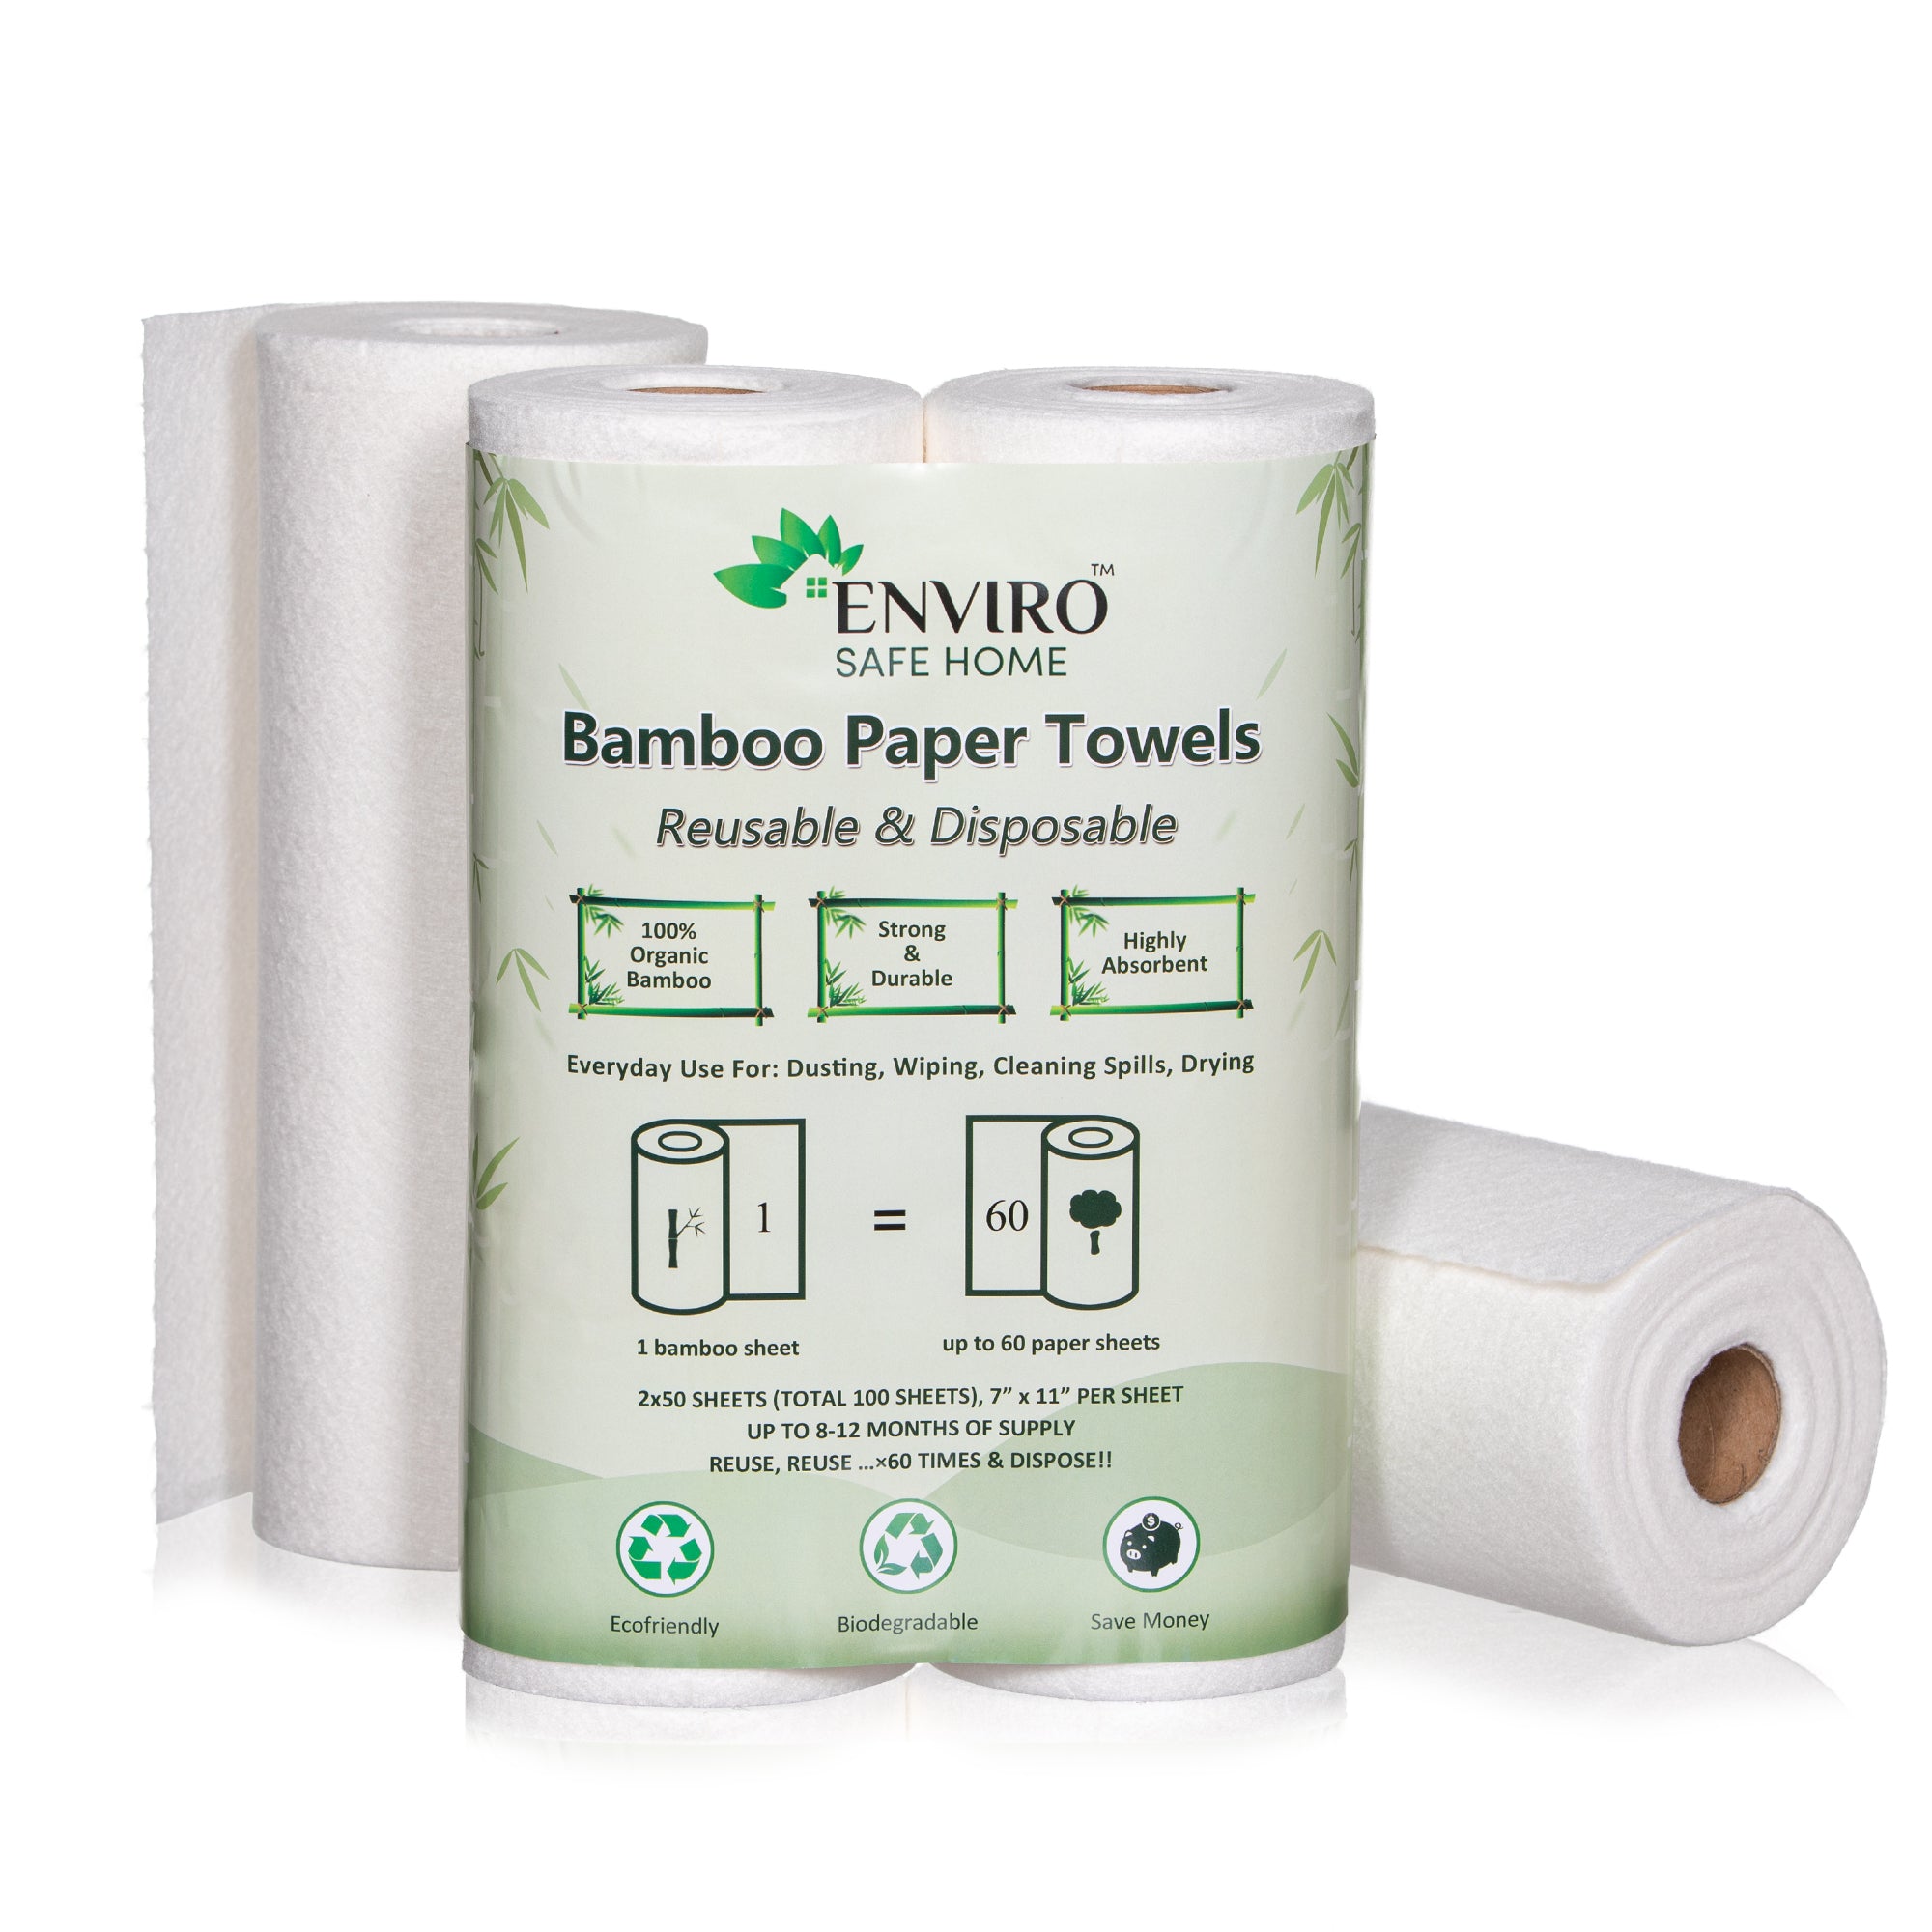 Our NEW Bamboo Paper Towels are here! 🎊 For the first time ever